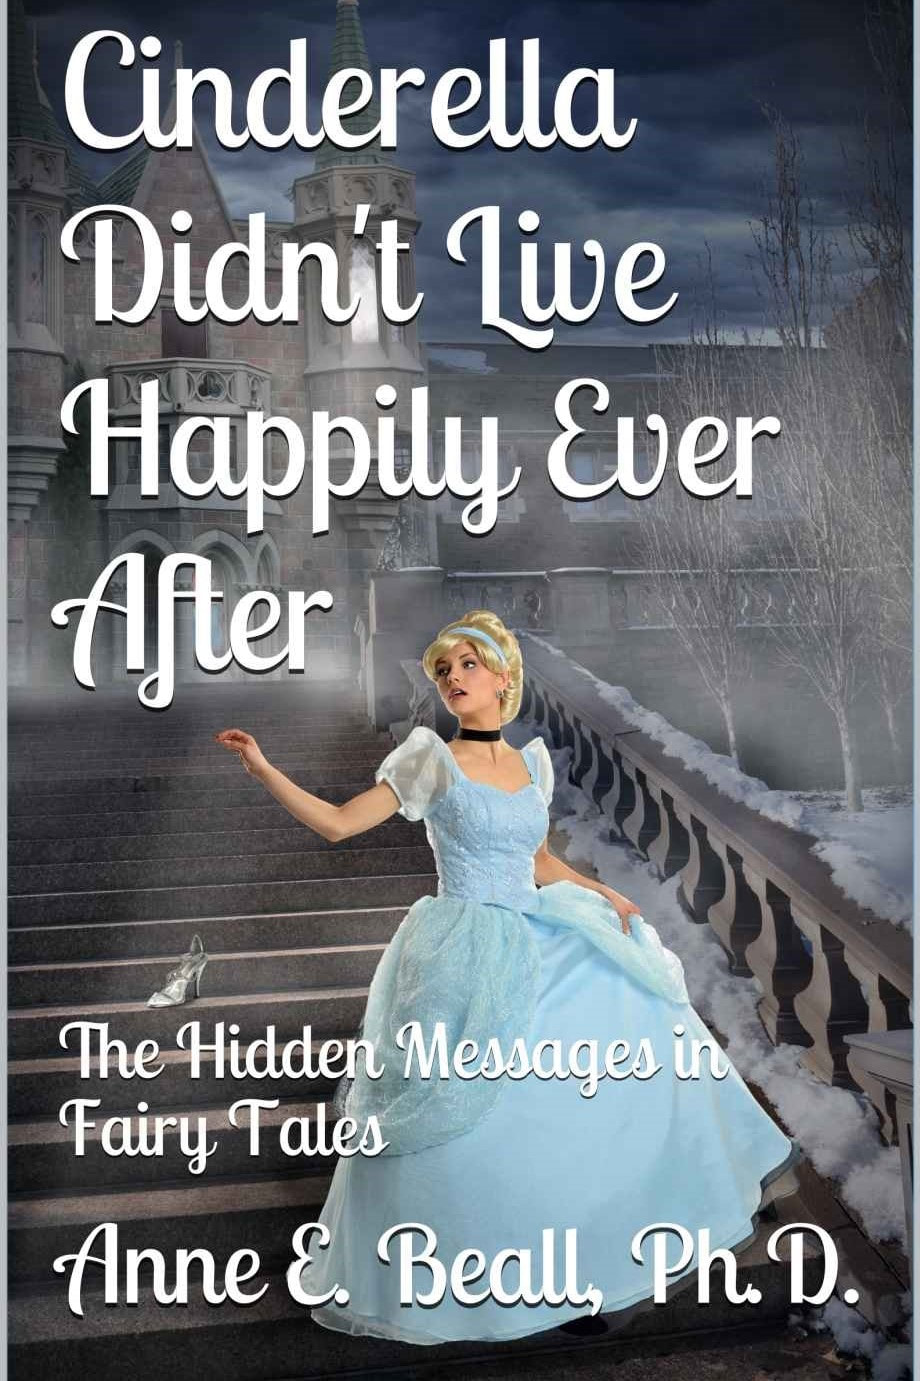 CINDERELLA DIDN'T LIVE HAPPILY EVER AFTER by Anne Beall